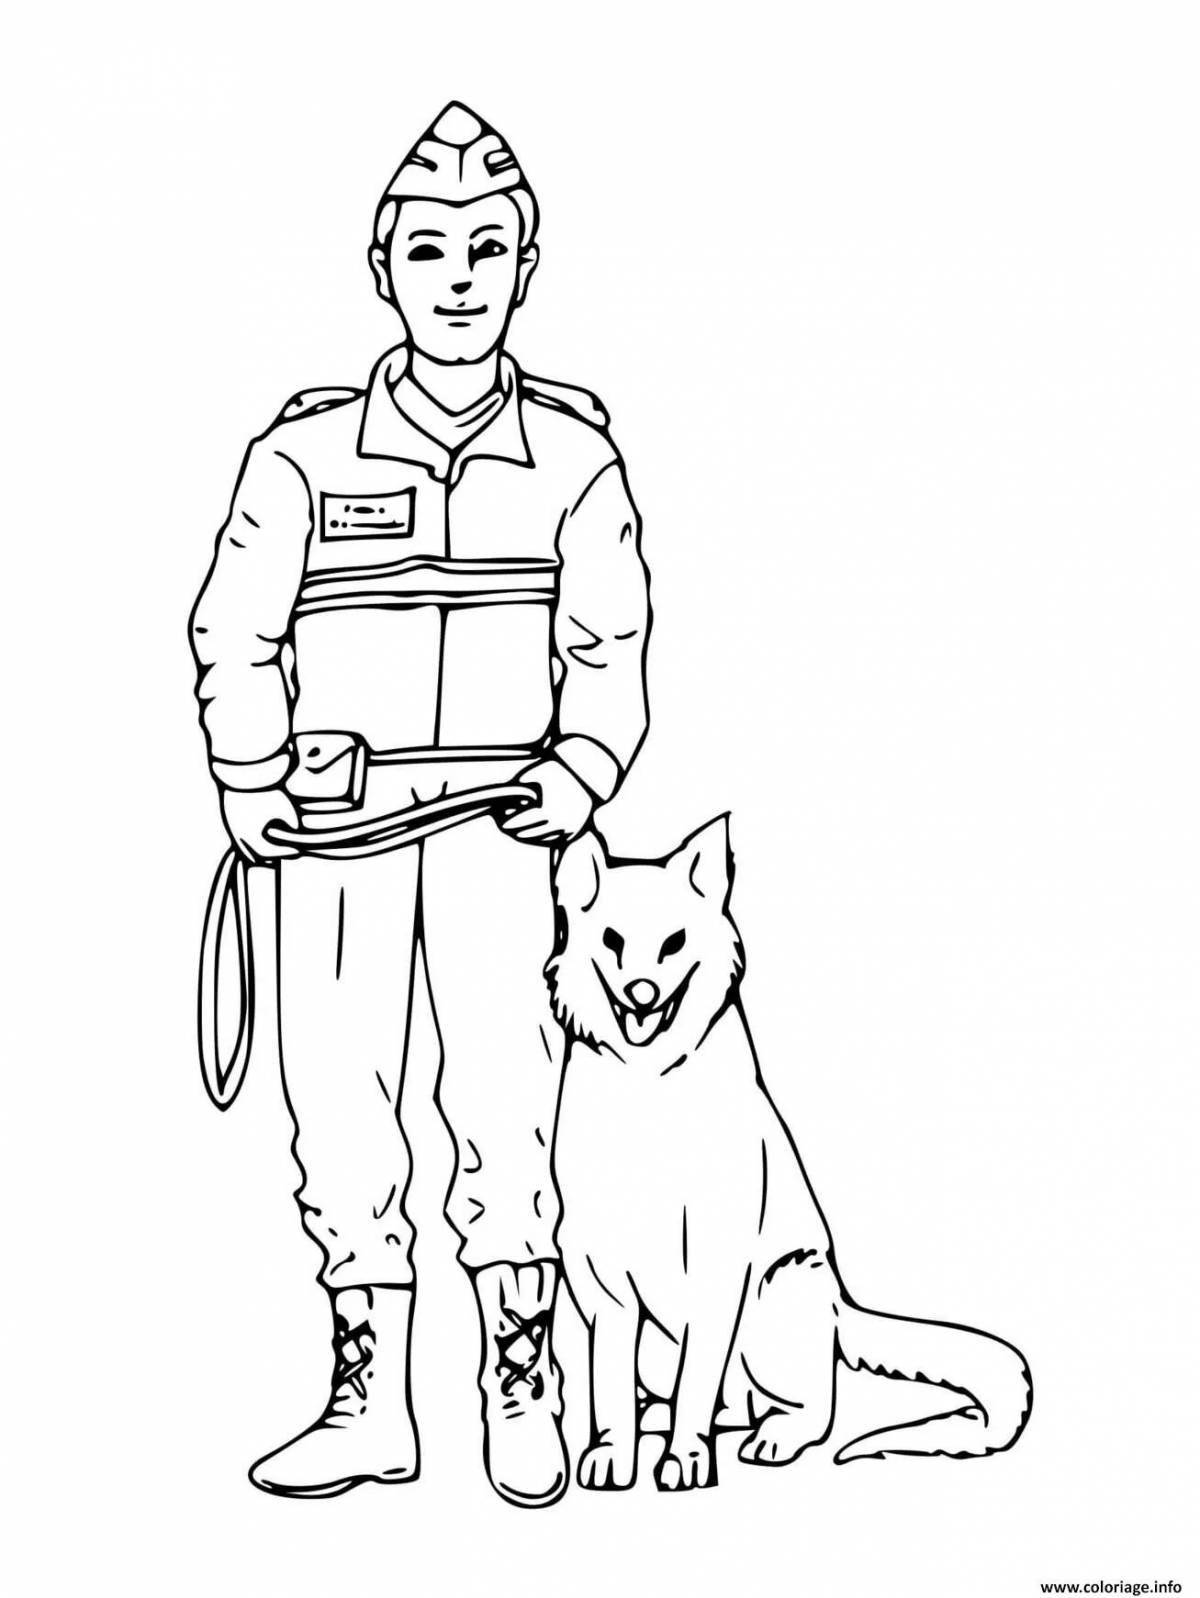 Border guard with dog #4